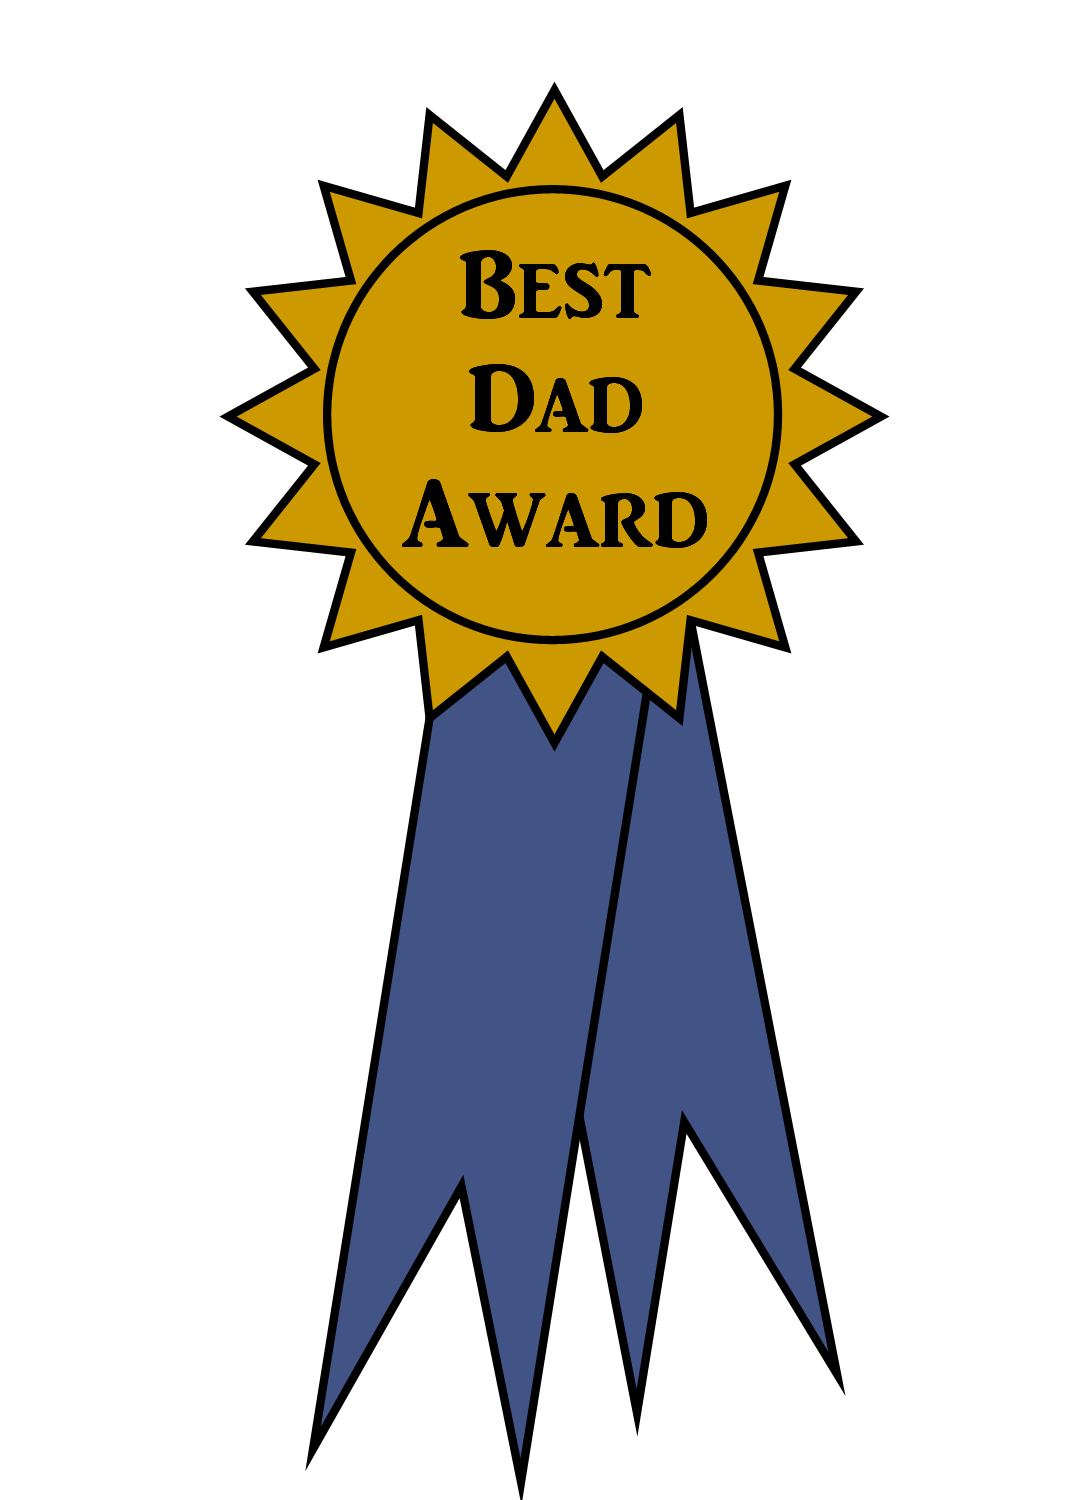 Free Clipart N Images  Father S Day Clip Art   Best Dad Award